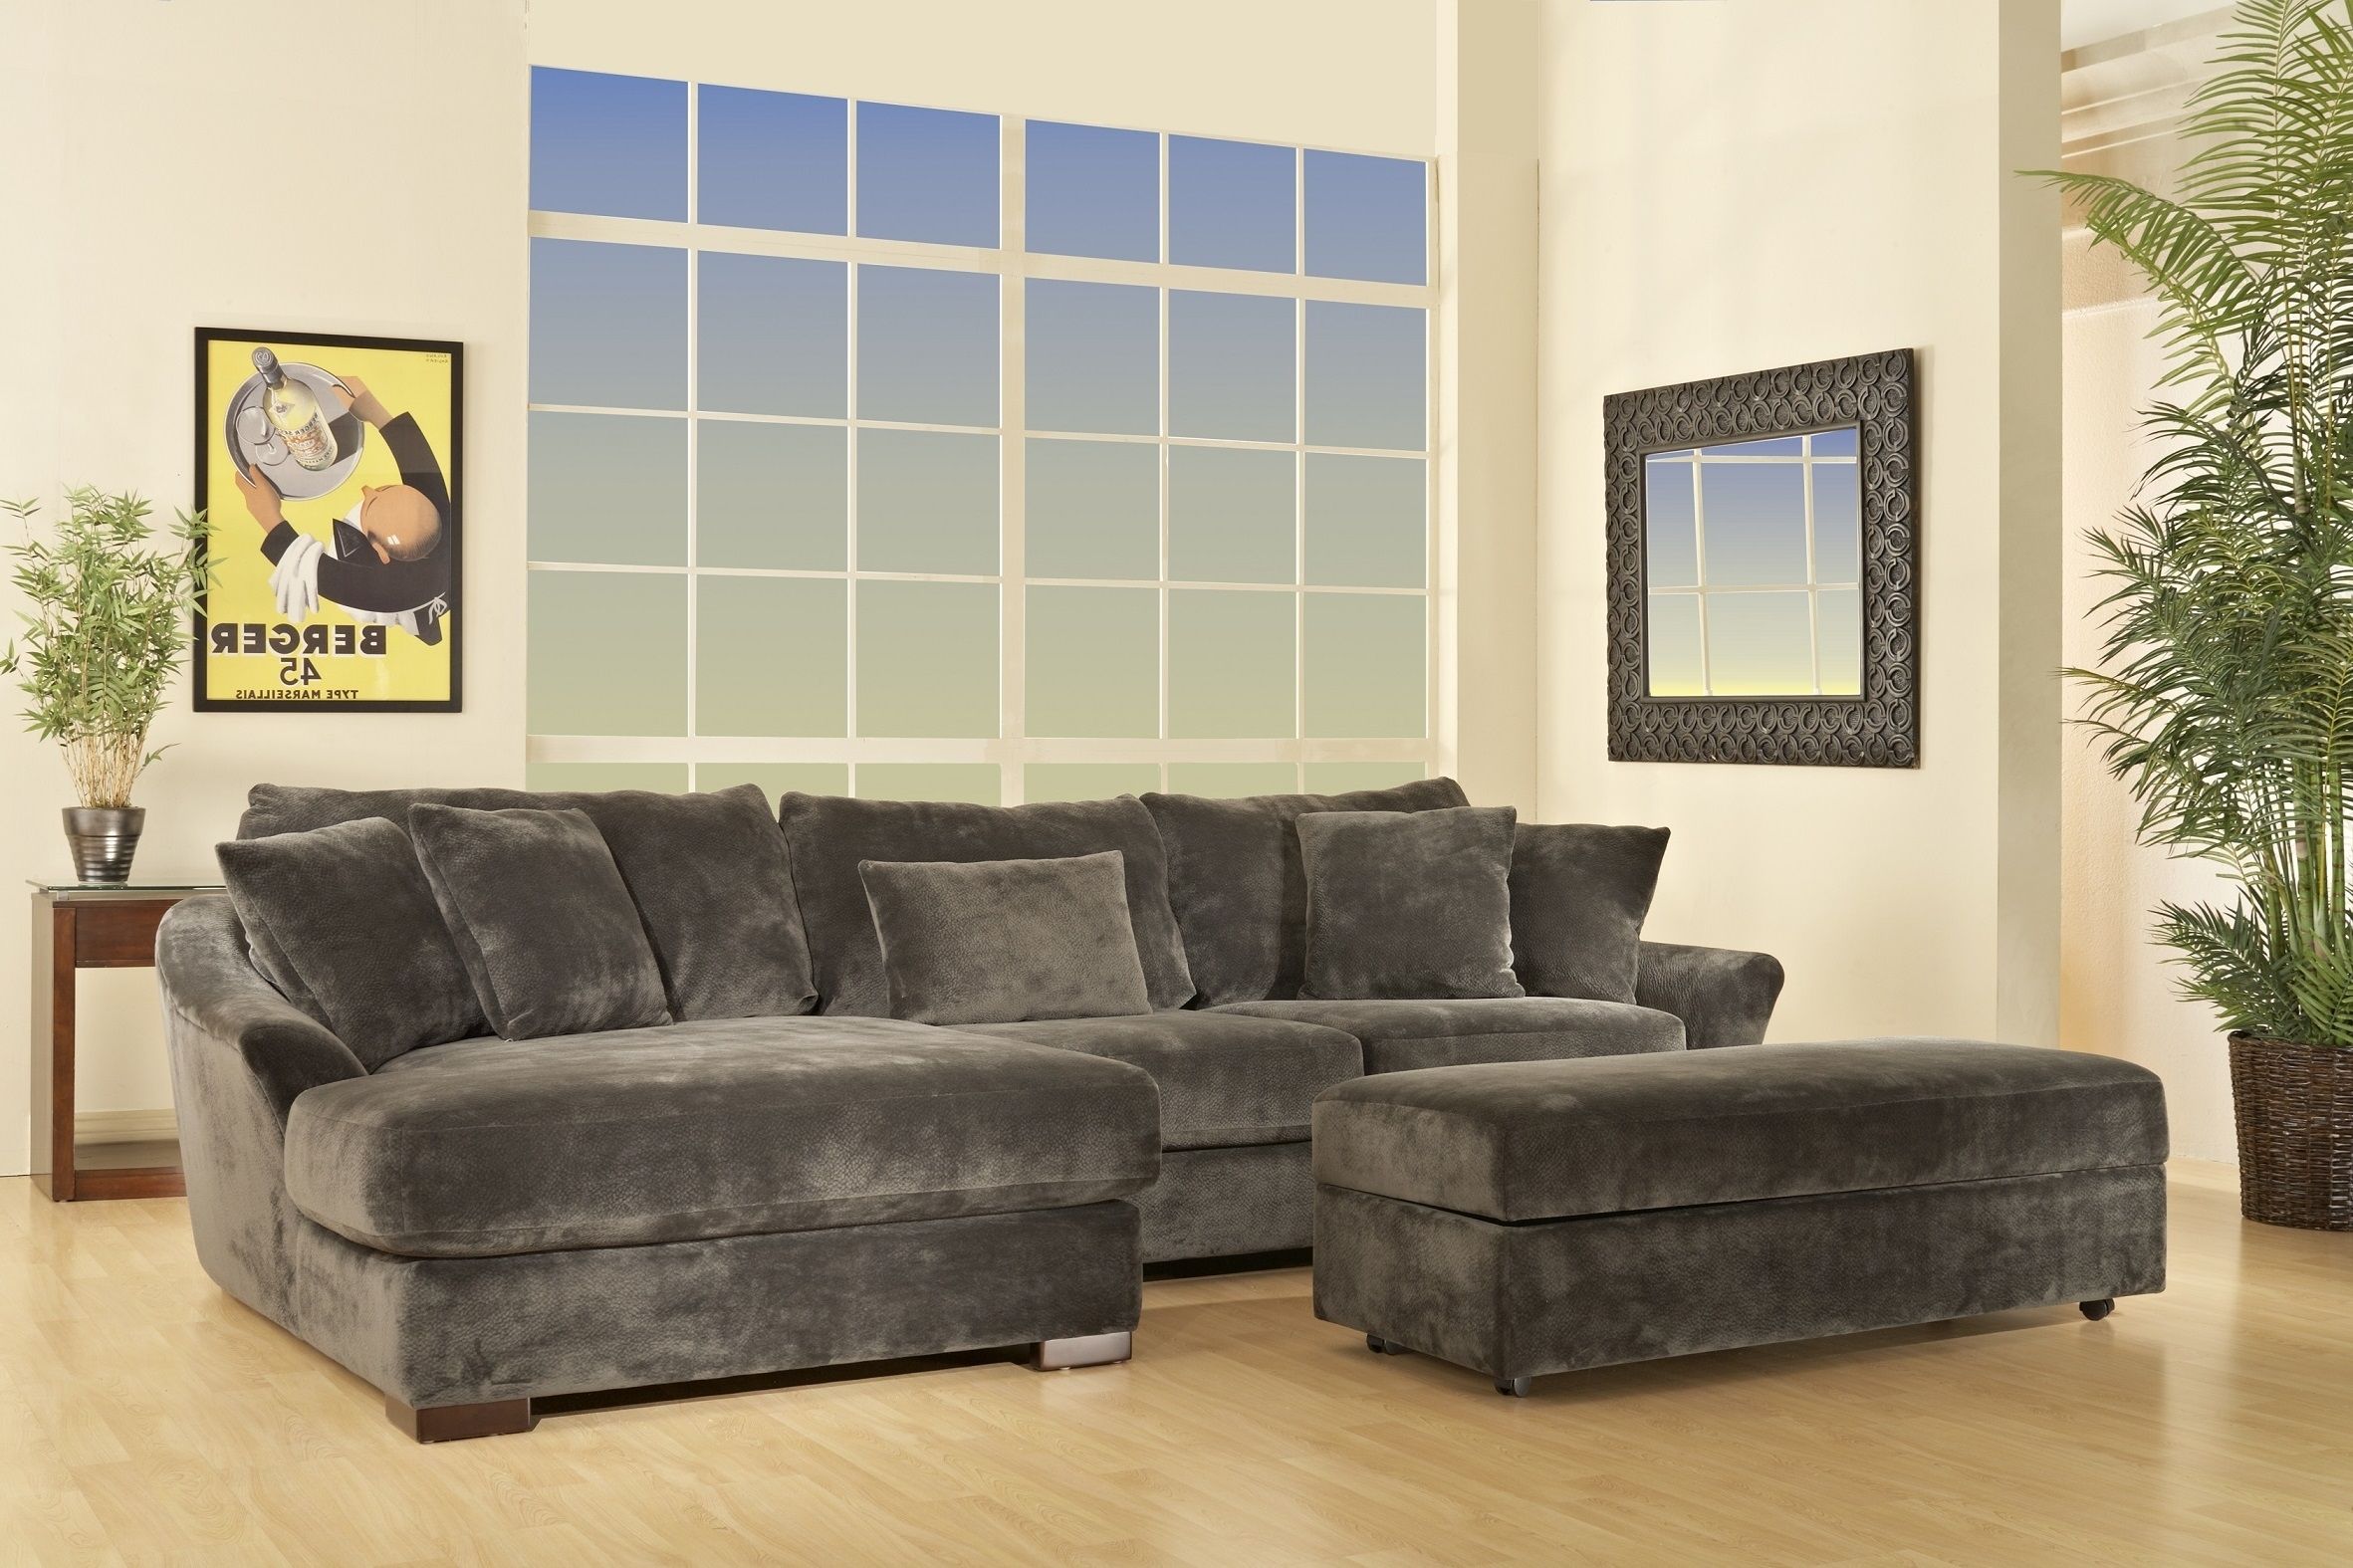 Atlanta Sofa Sectional With Left Arm Chaisefairmont Designs With Regard To Sectional Sofas In Atlanta (View 4 of 10)